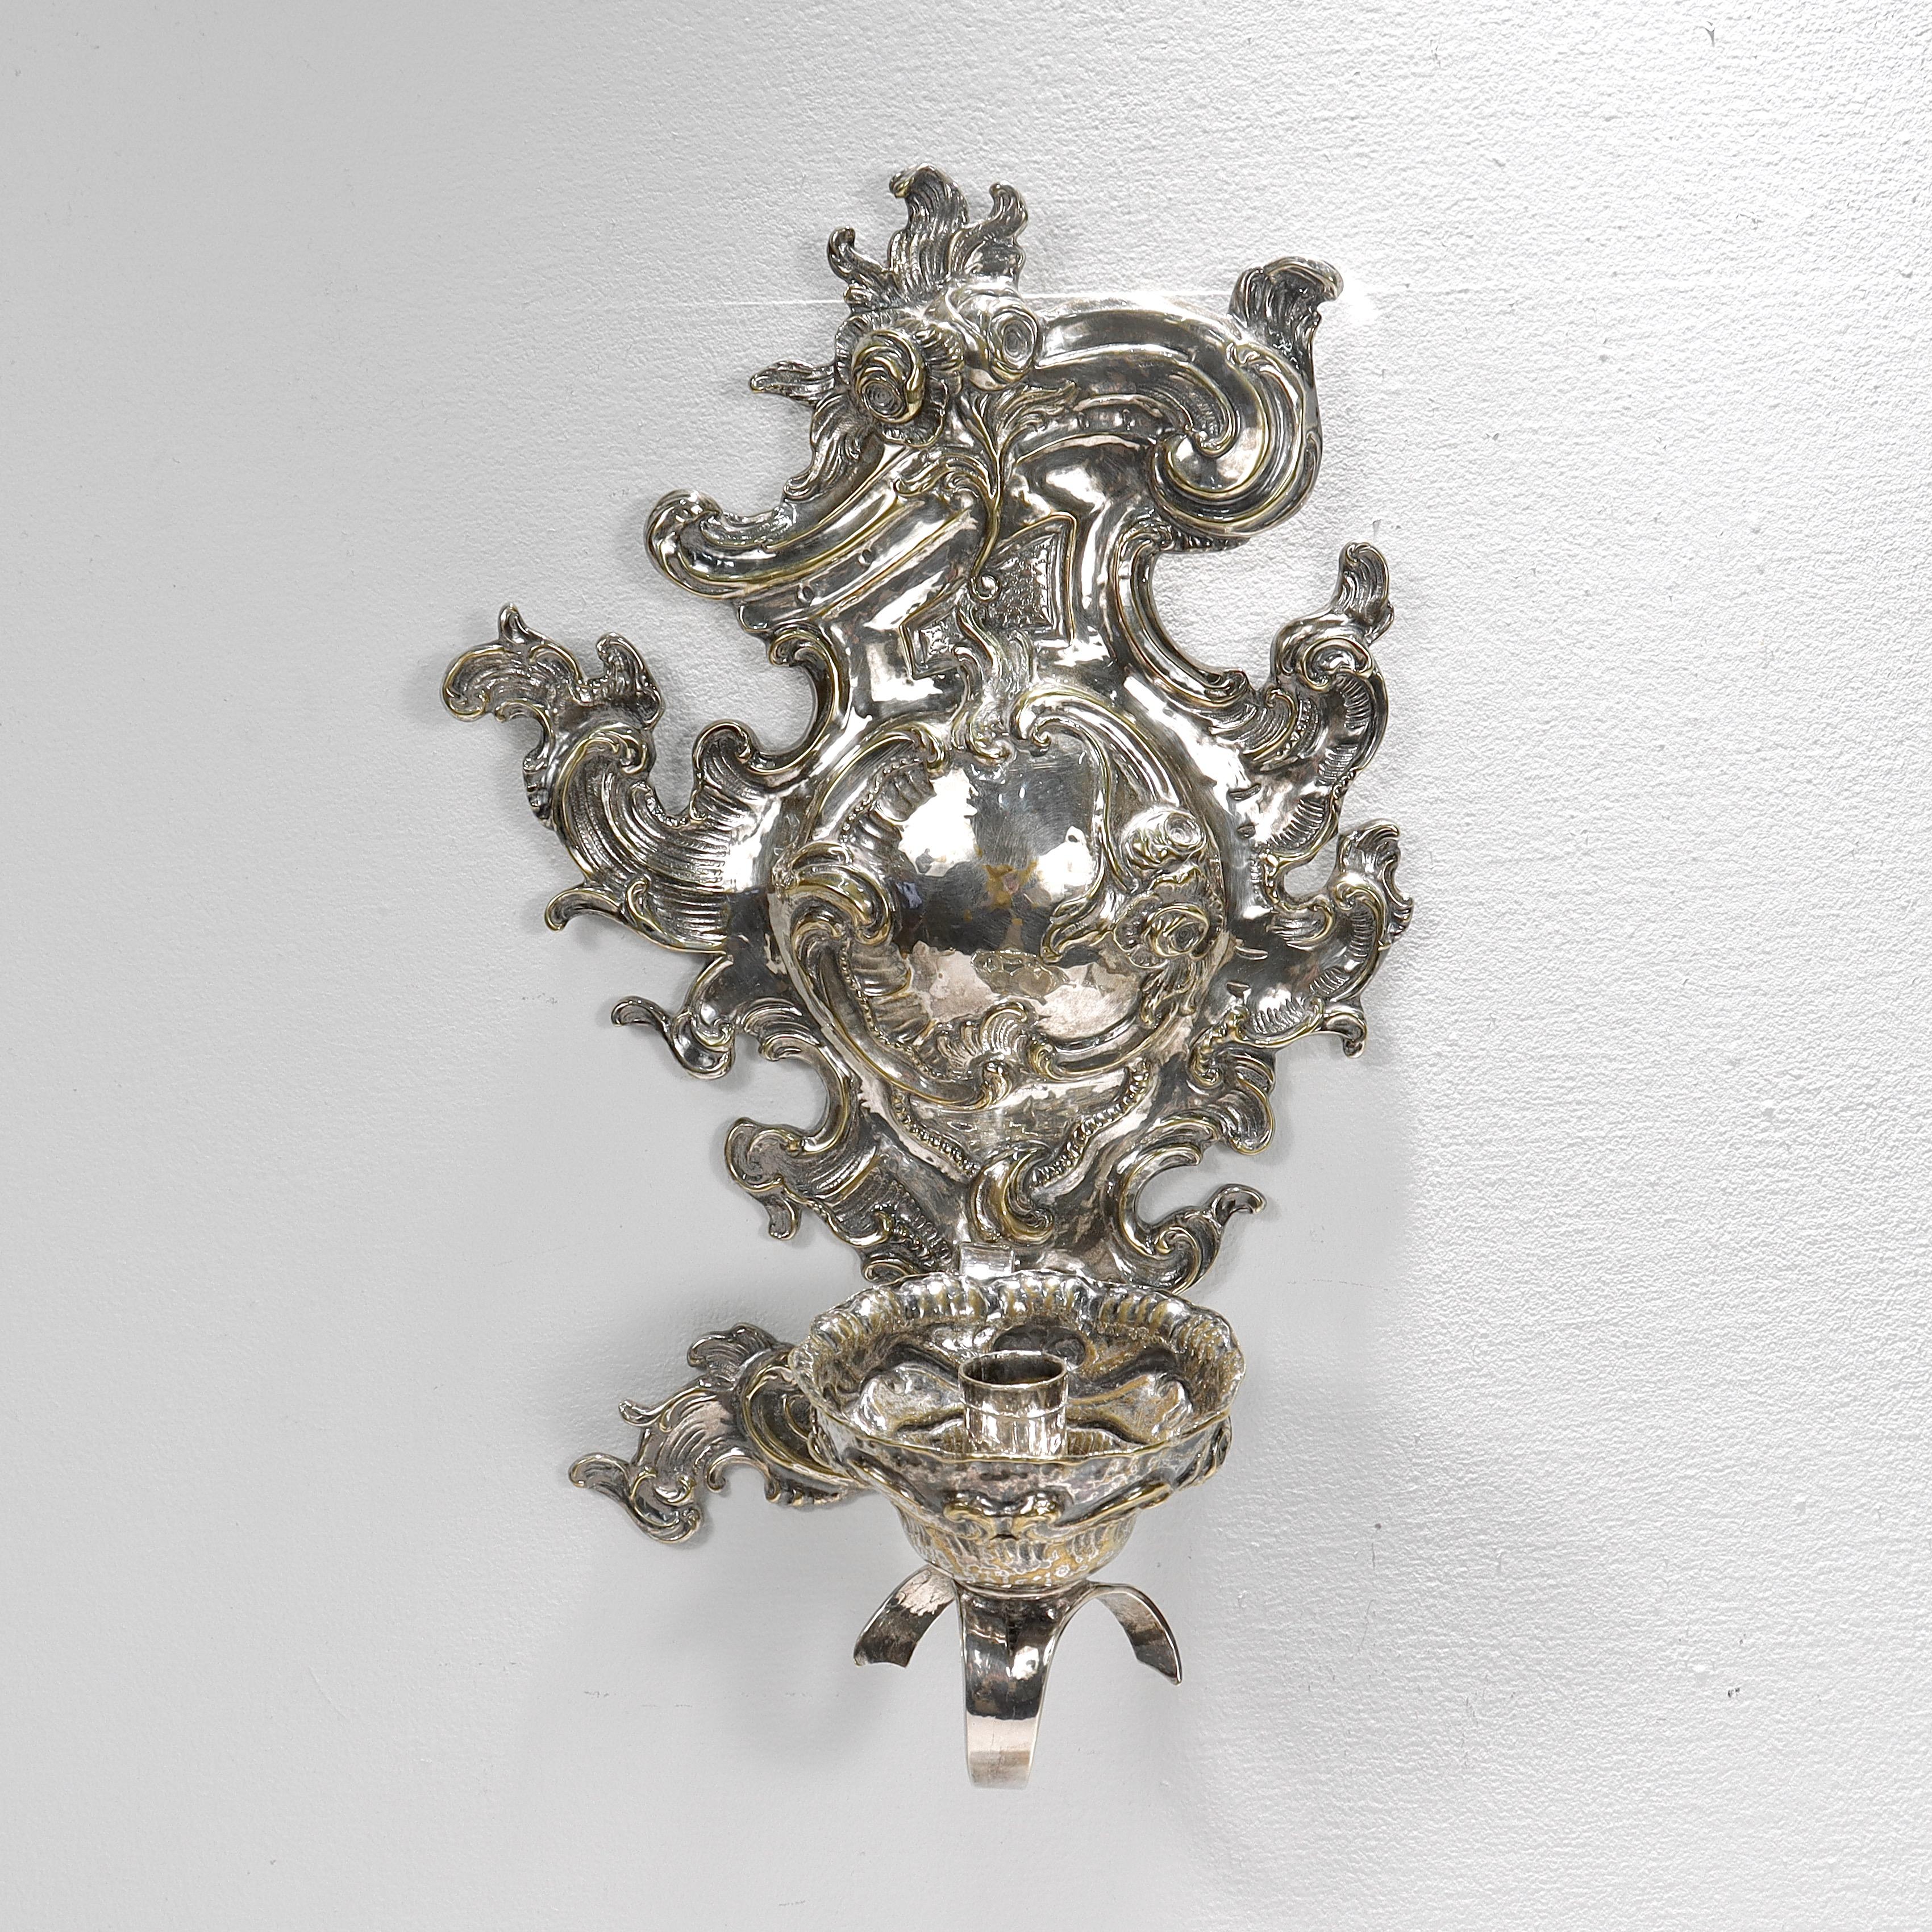 Antique Rococo or Rococo Revival Silver Plated Wall Sconces For Sale 2